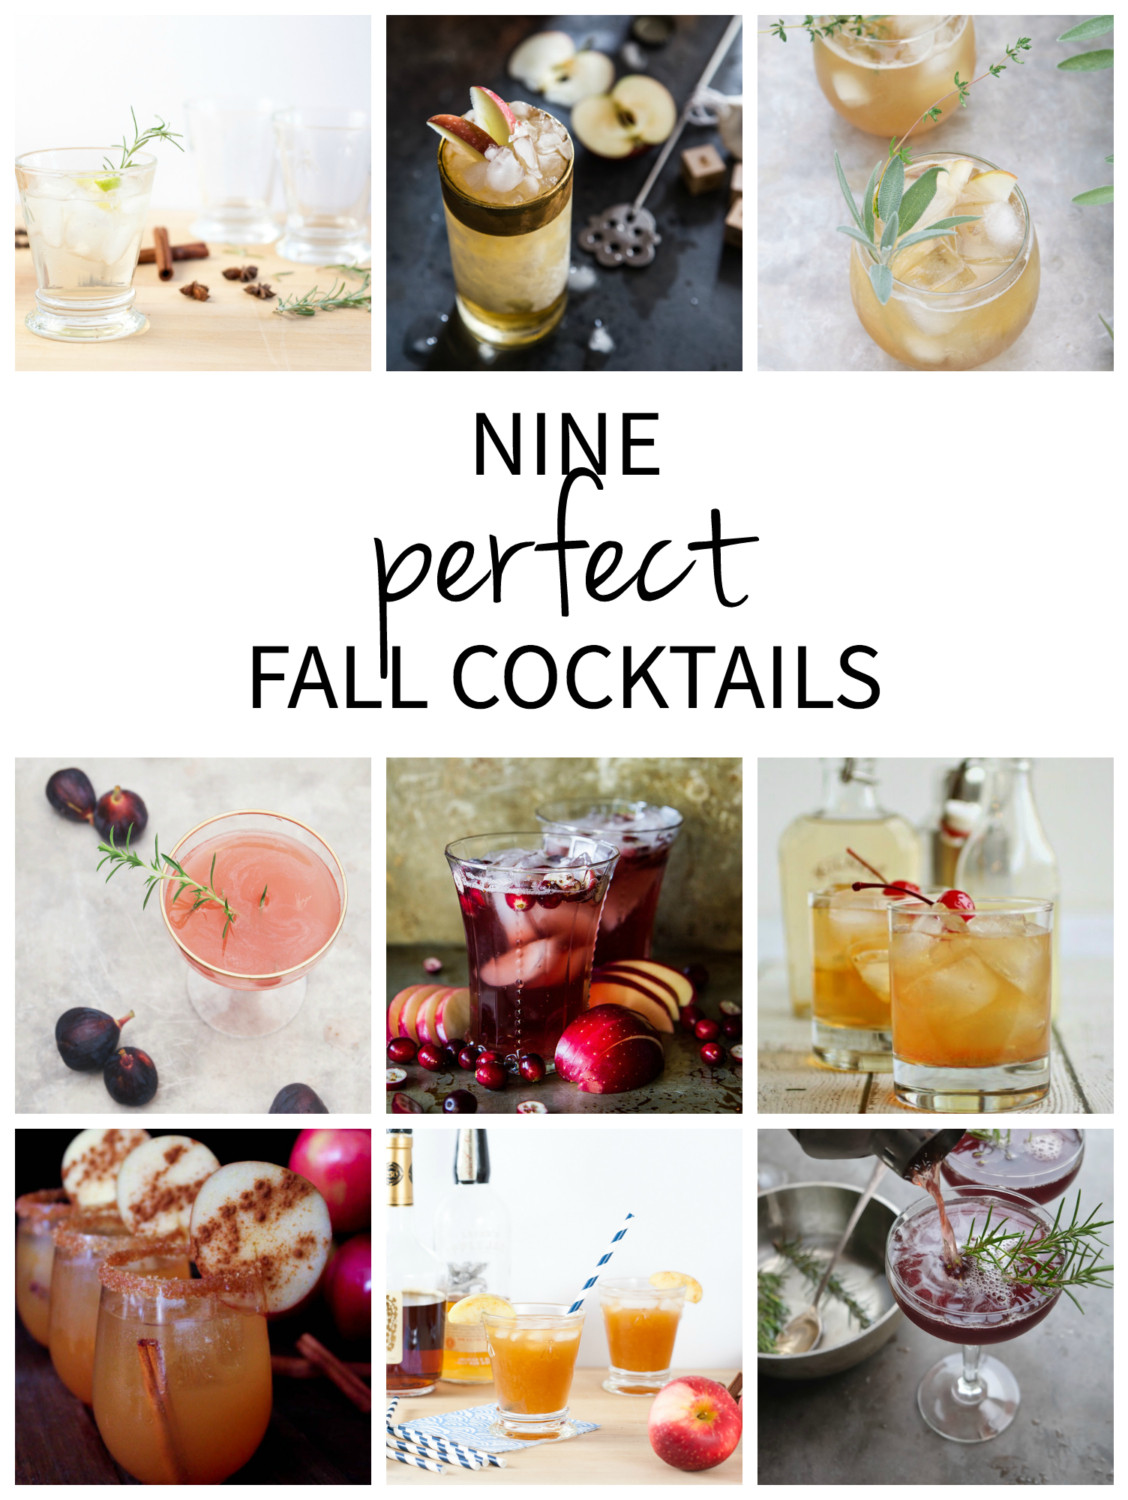 Nine fall cocktails that will have you acting like a seasoned mixologist at home! Perfect for any fall occasion - fall dinner party, Thanksgiving cocktail, holiday cocktail, Christmas cocktail, you name it! So many delicious ideas to try.